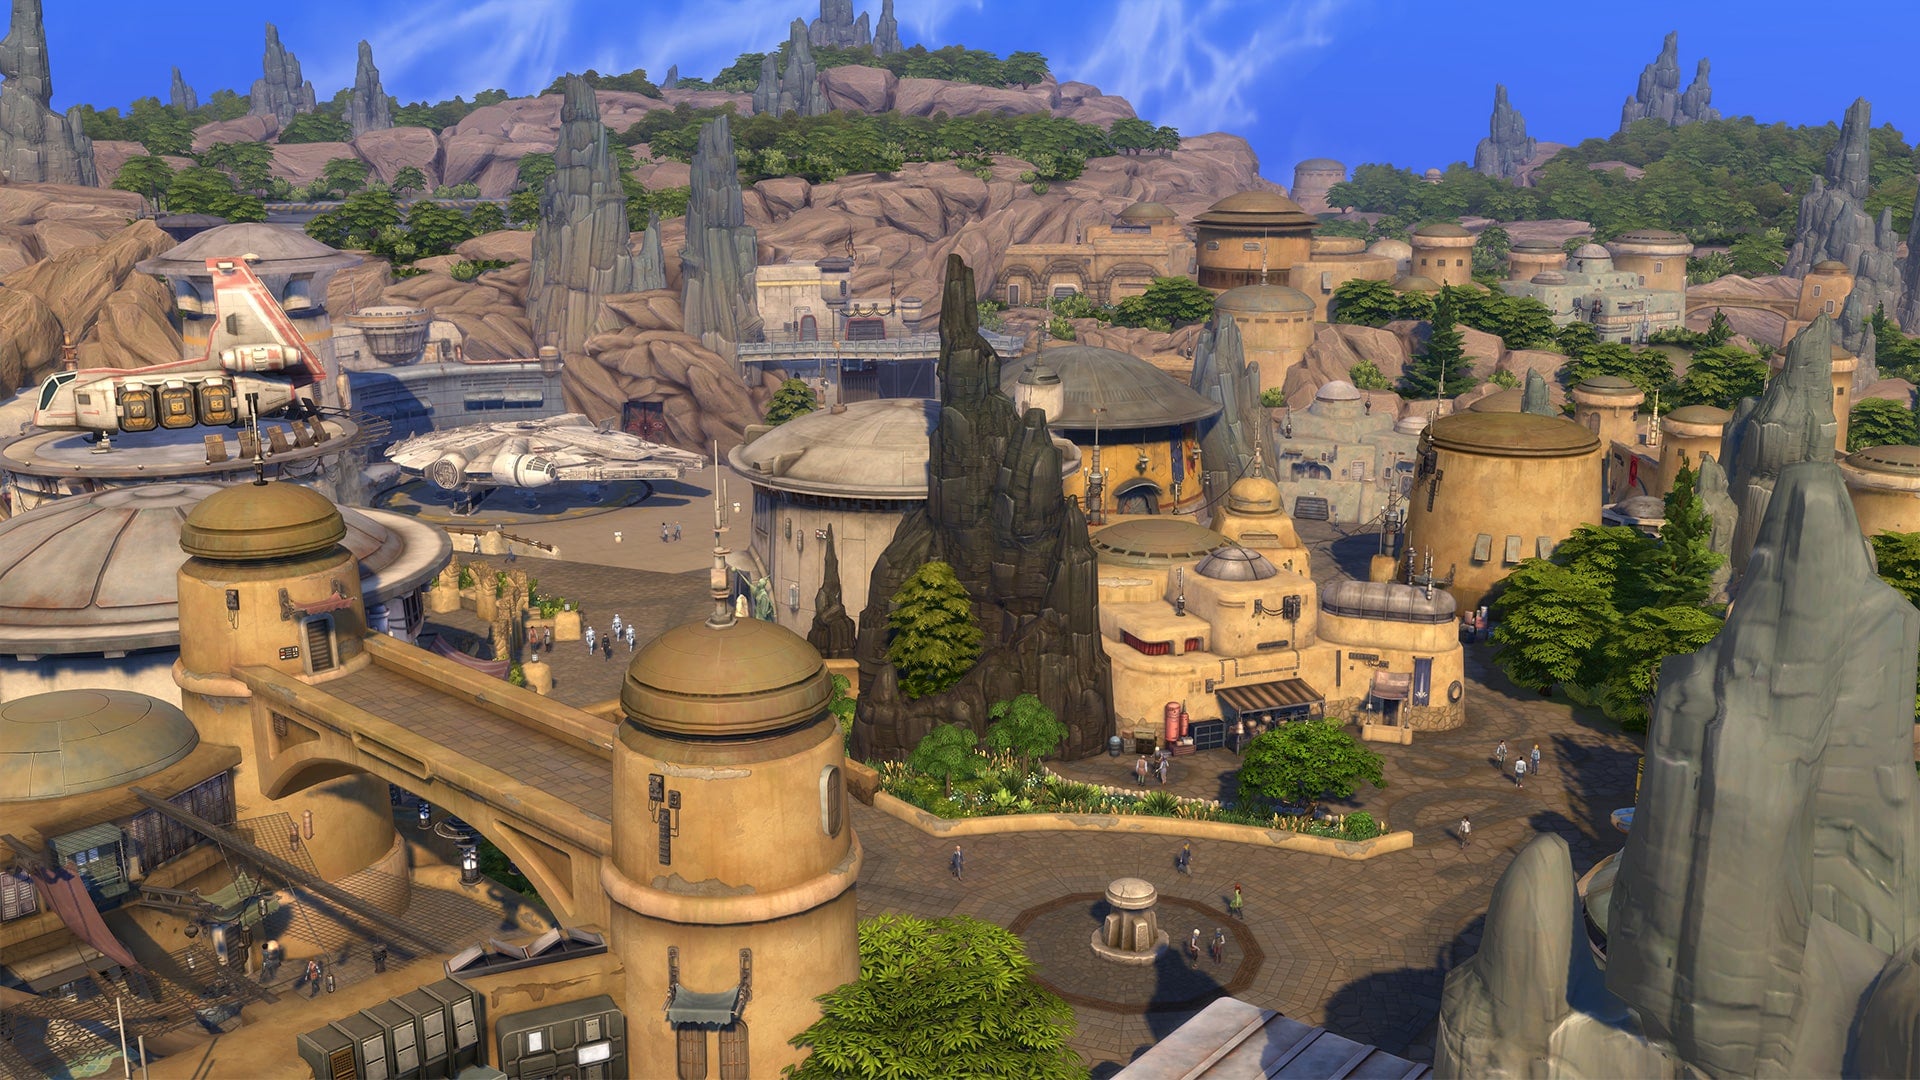 The Sims 4: Star Wars - Journey to Batuu for PC and Mac